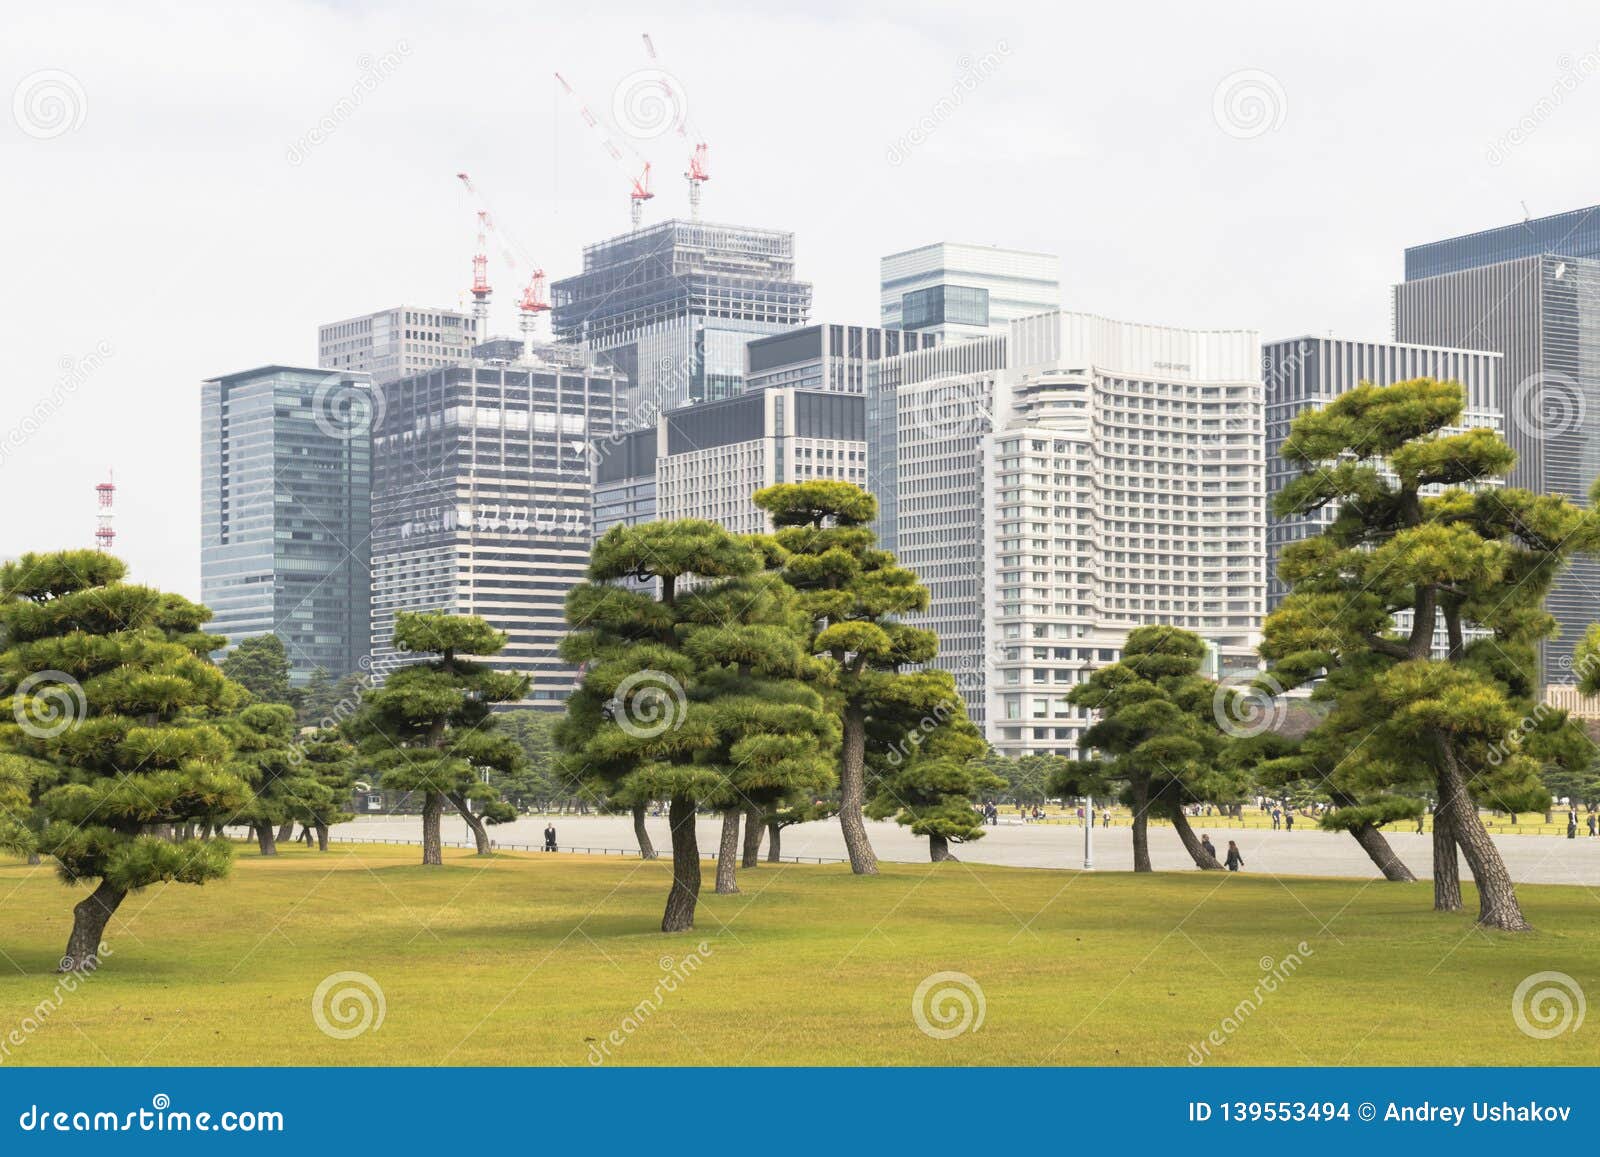 or Urban Background with View of Park in Stock Photo - building, landmark: 139553494